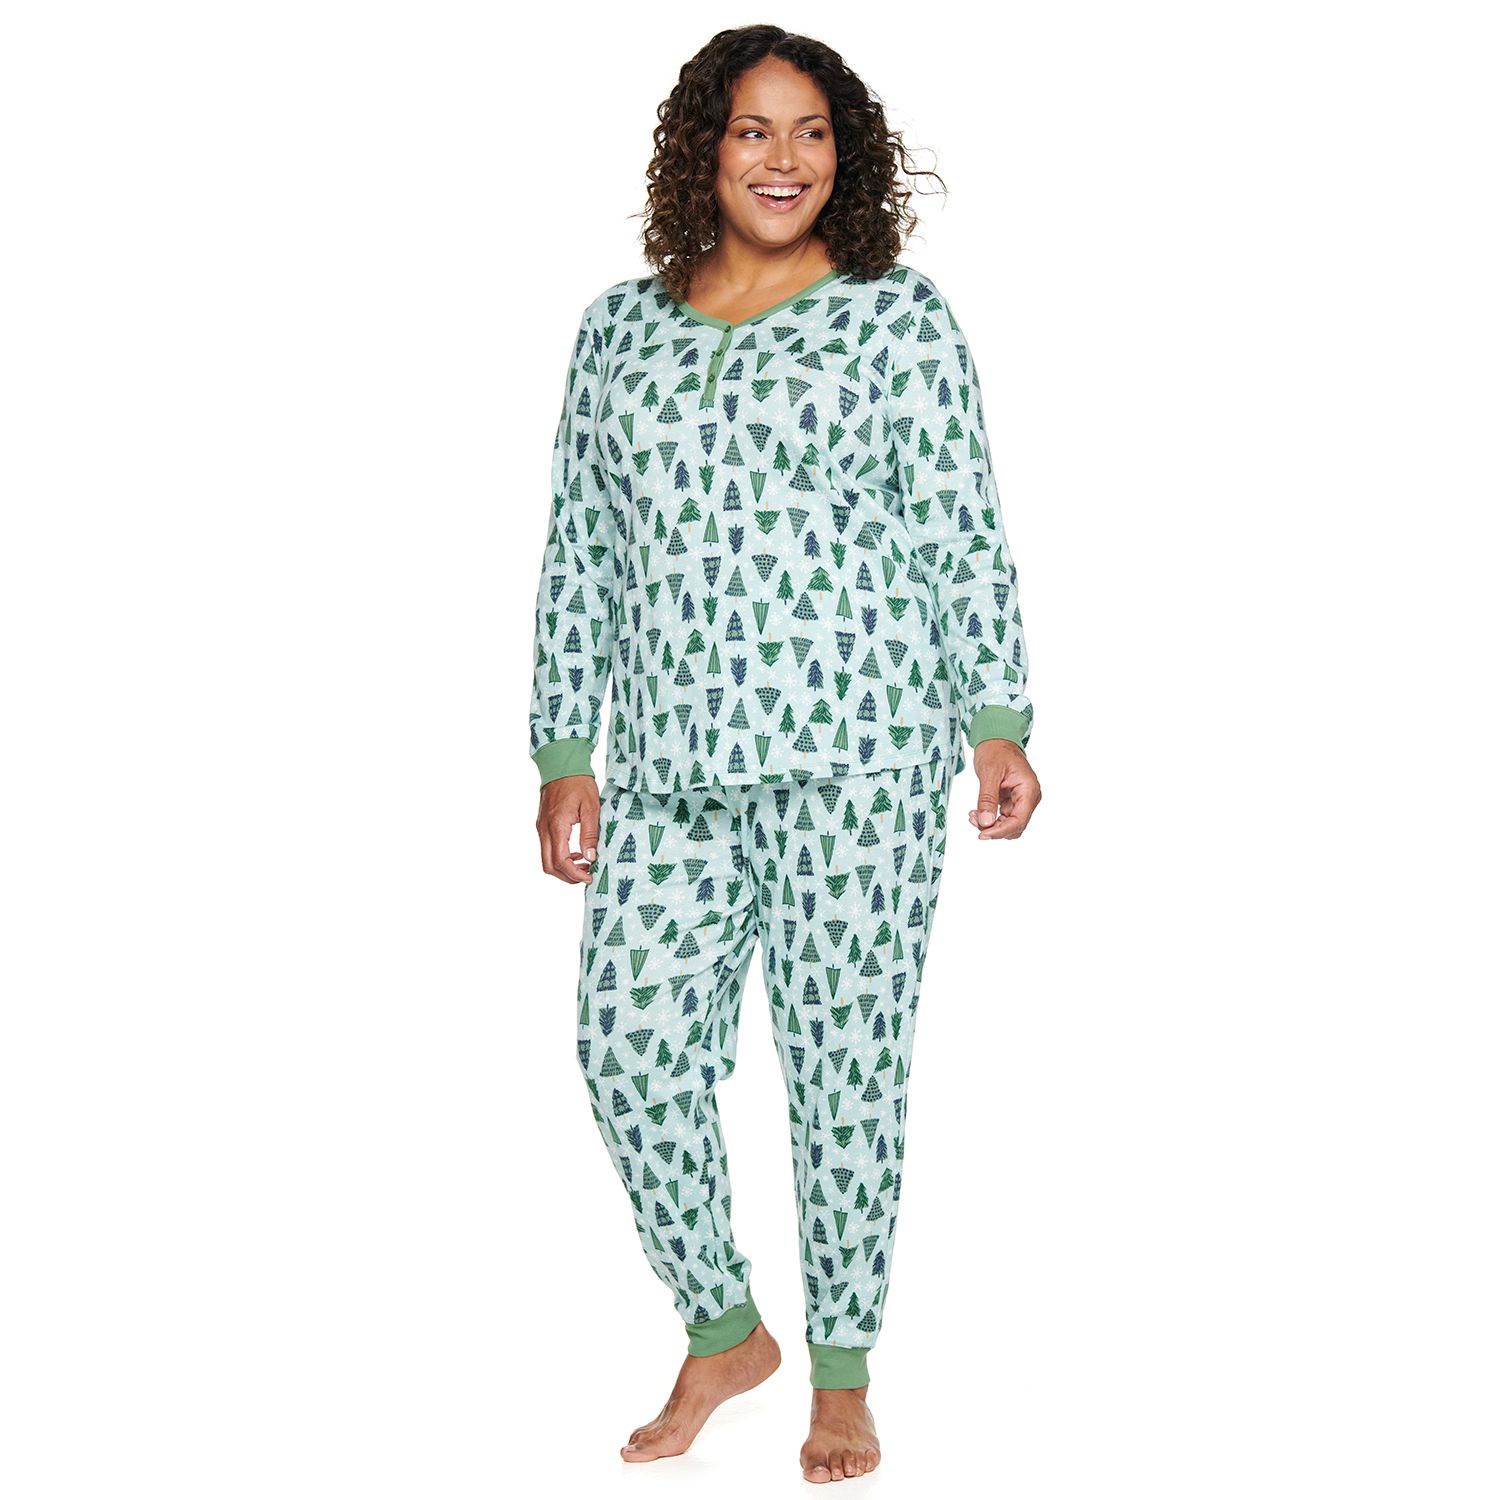 Image for LC Lauren Conrad Plus Size Jammies For Your Families Warmest Wishes Pajama Set at Kohl's.